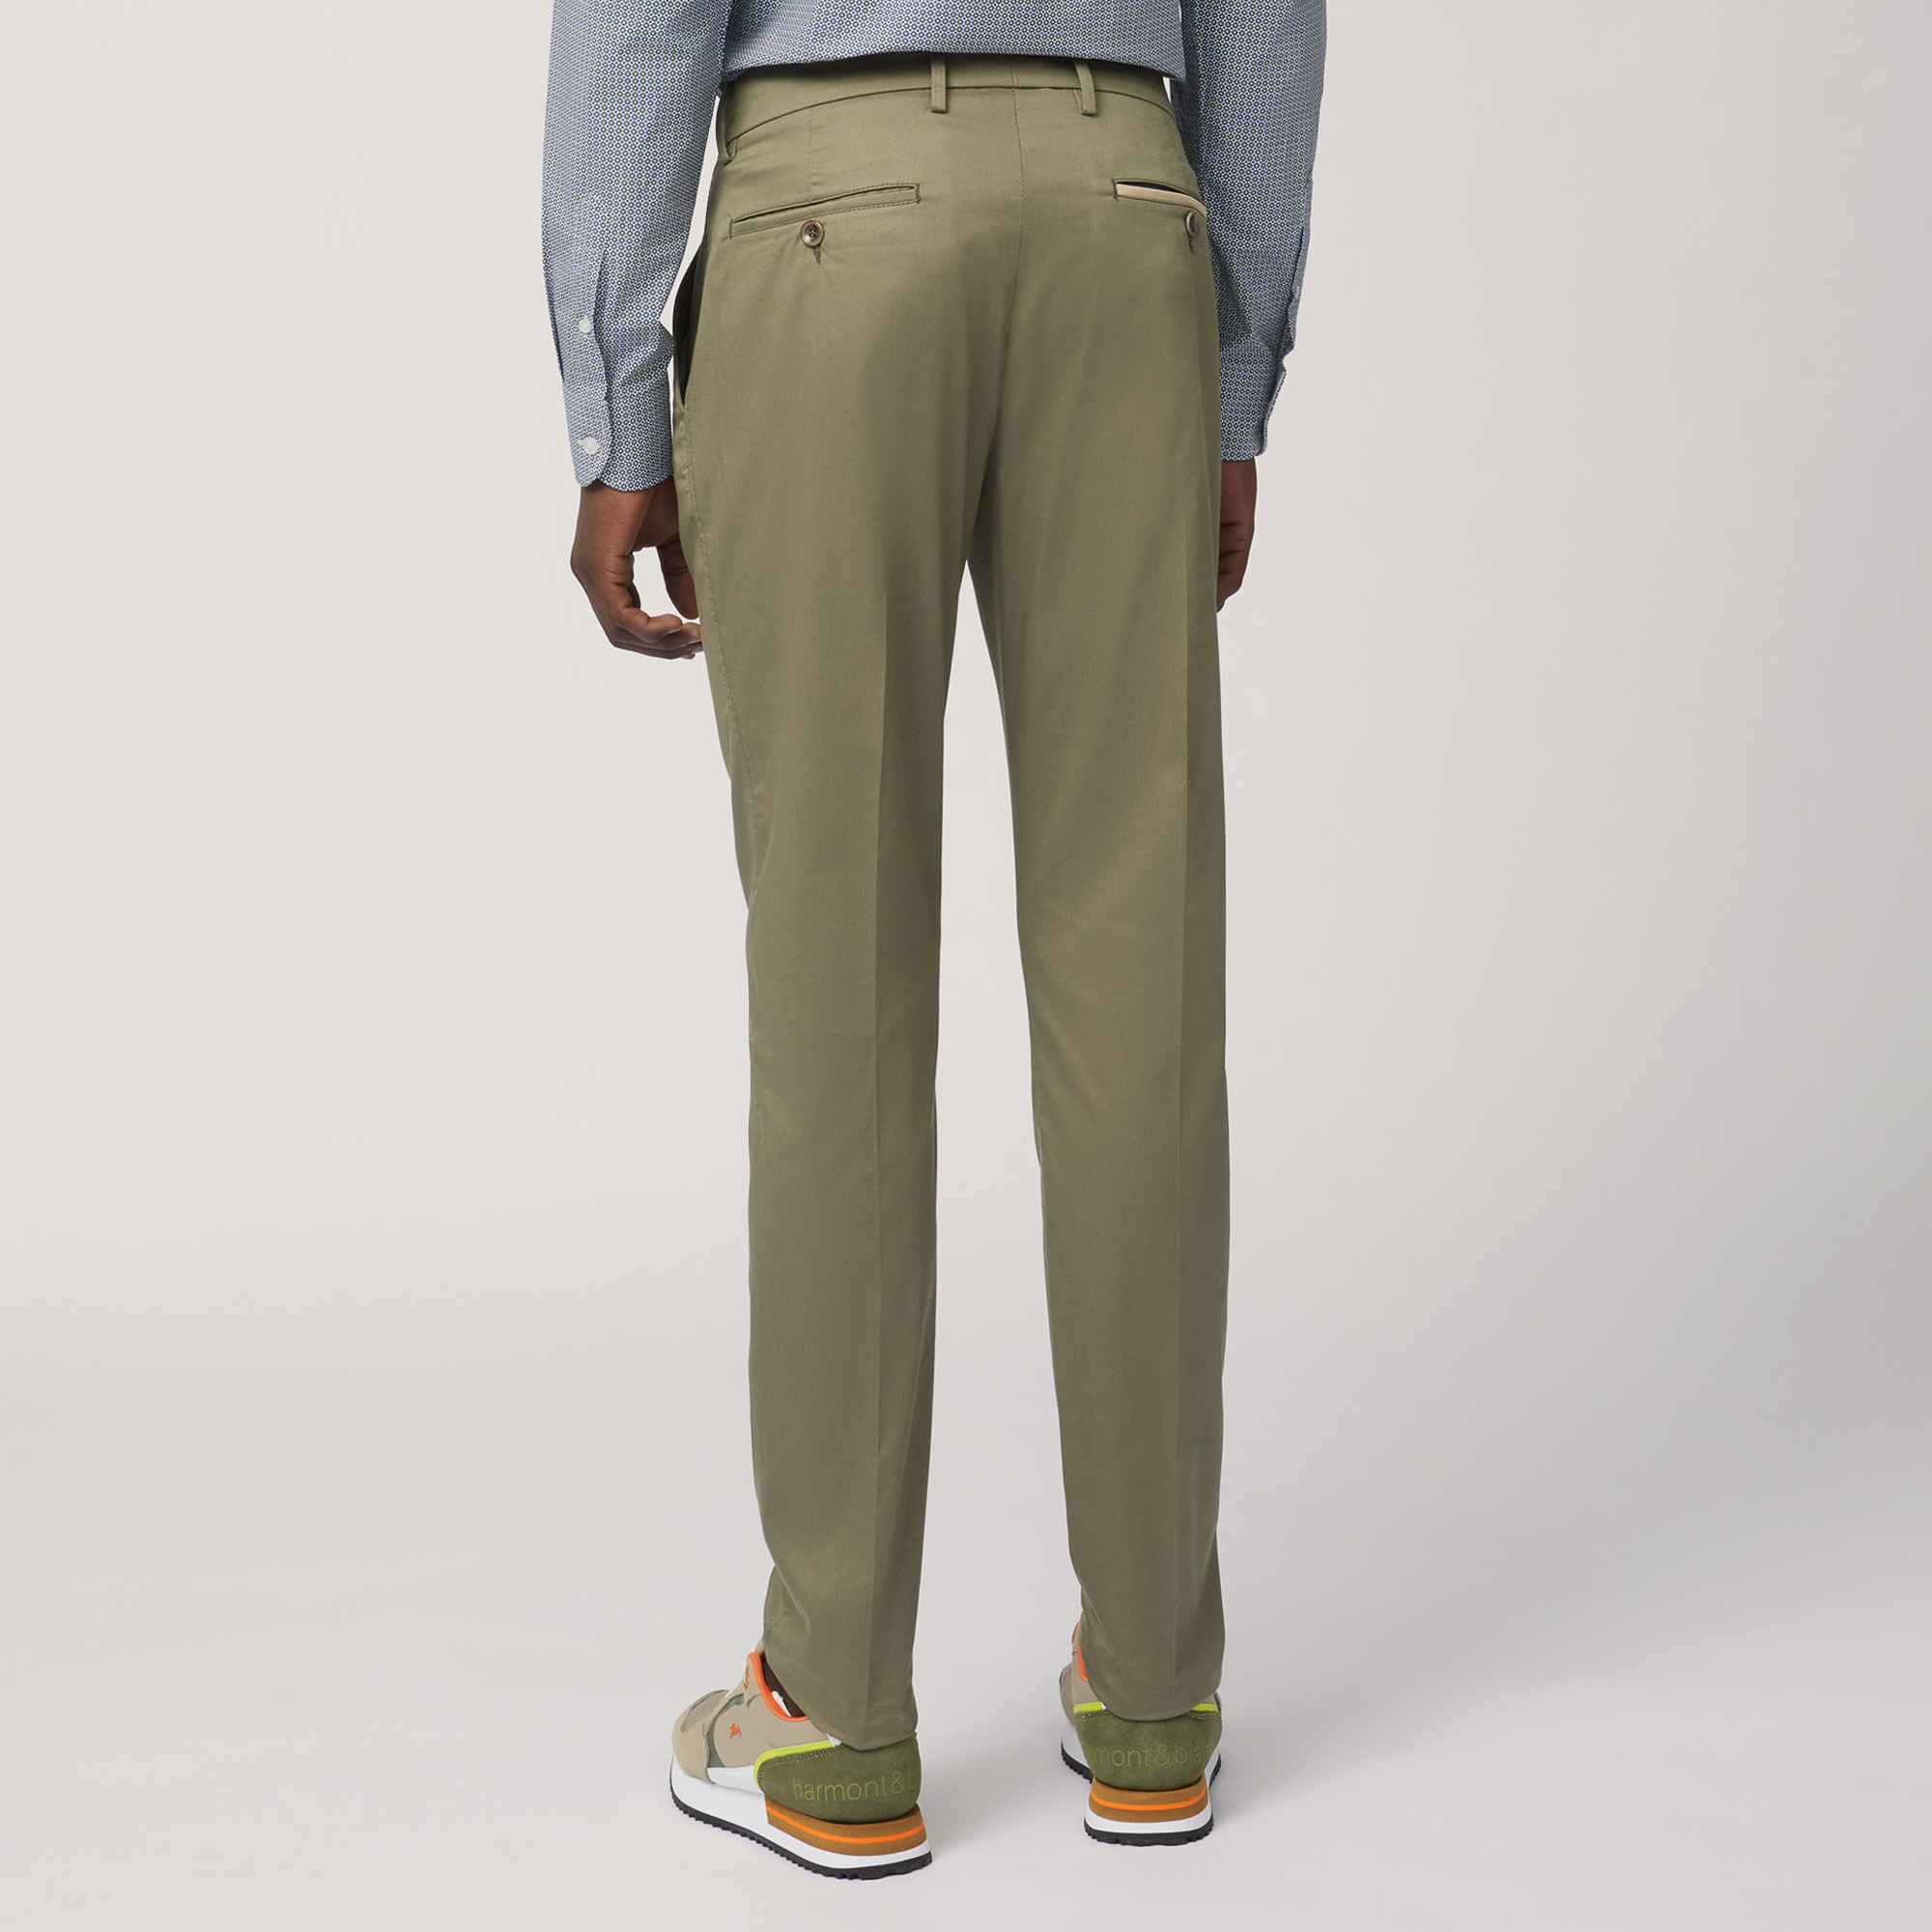 Customized Chino Pants, Green, large image number 1